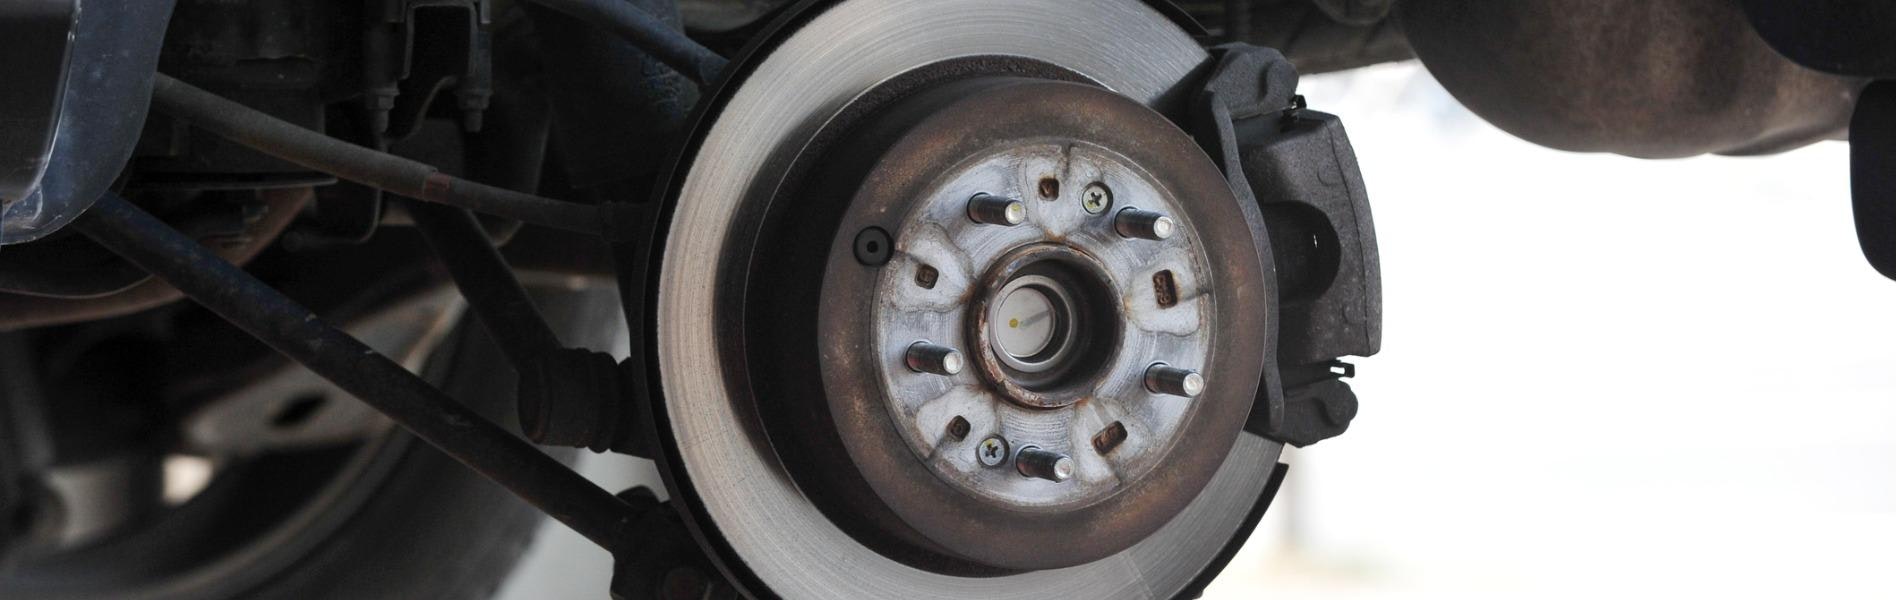 How to Identify & Fix Uneven Brake Pad Wear, Jiffy Lube